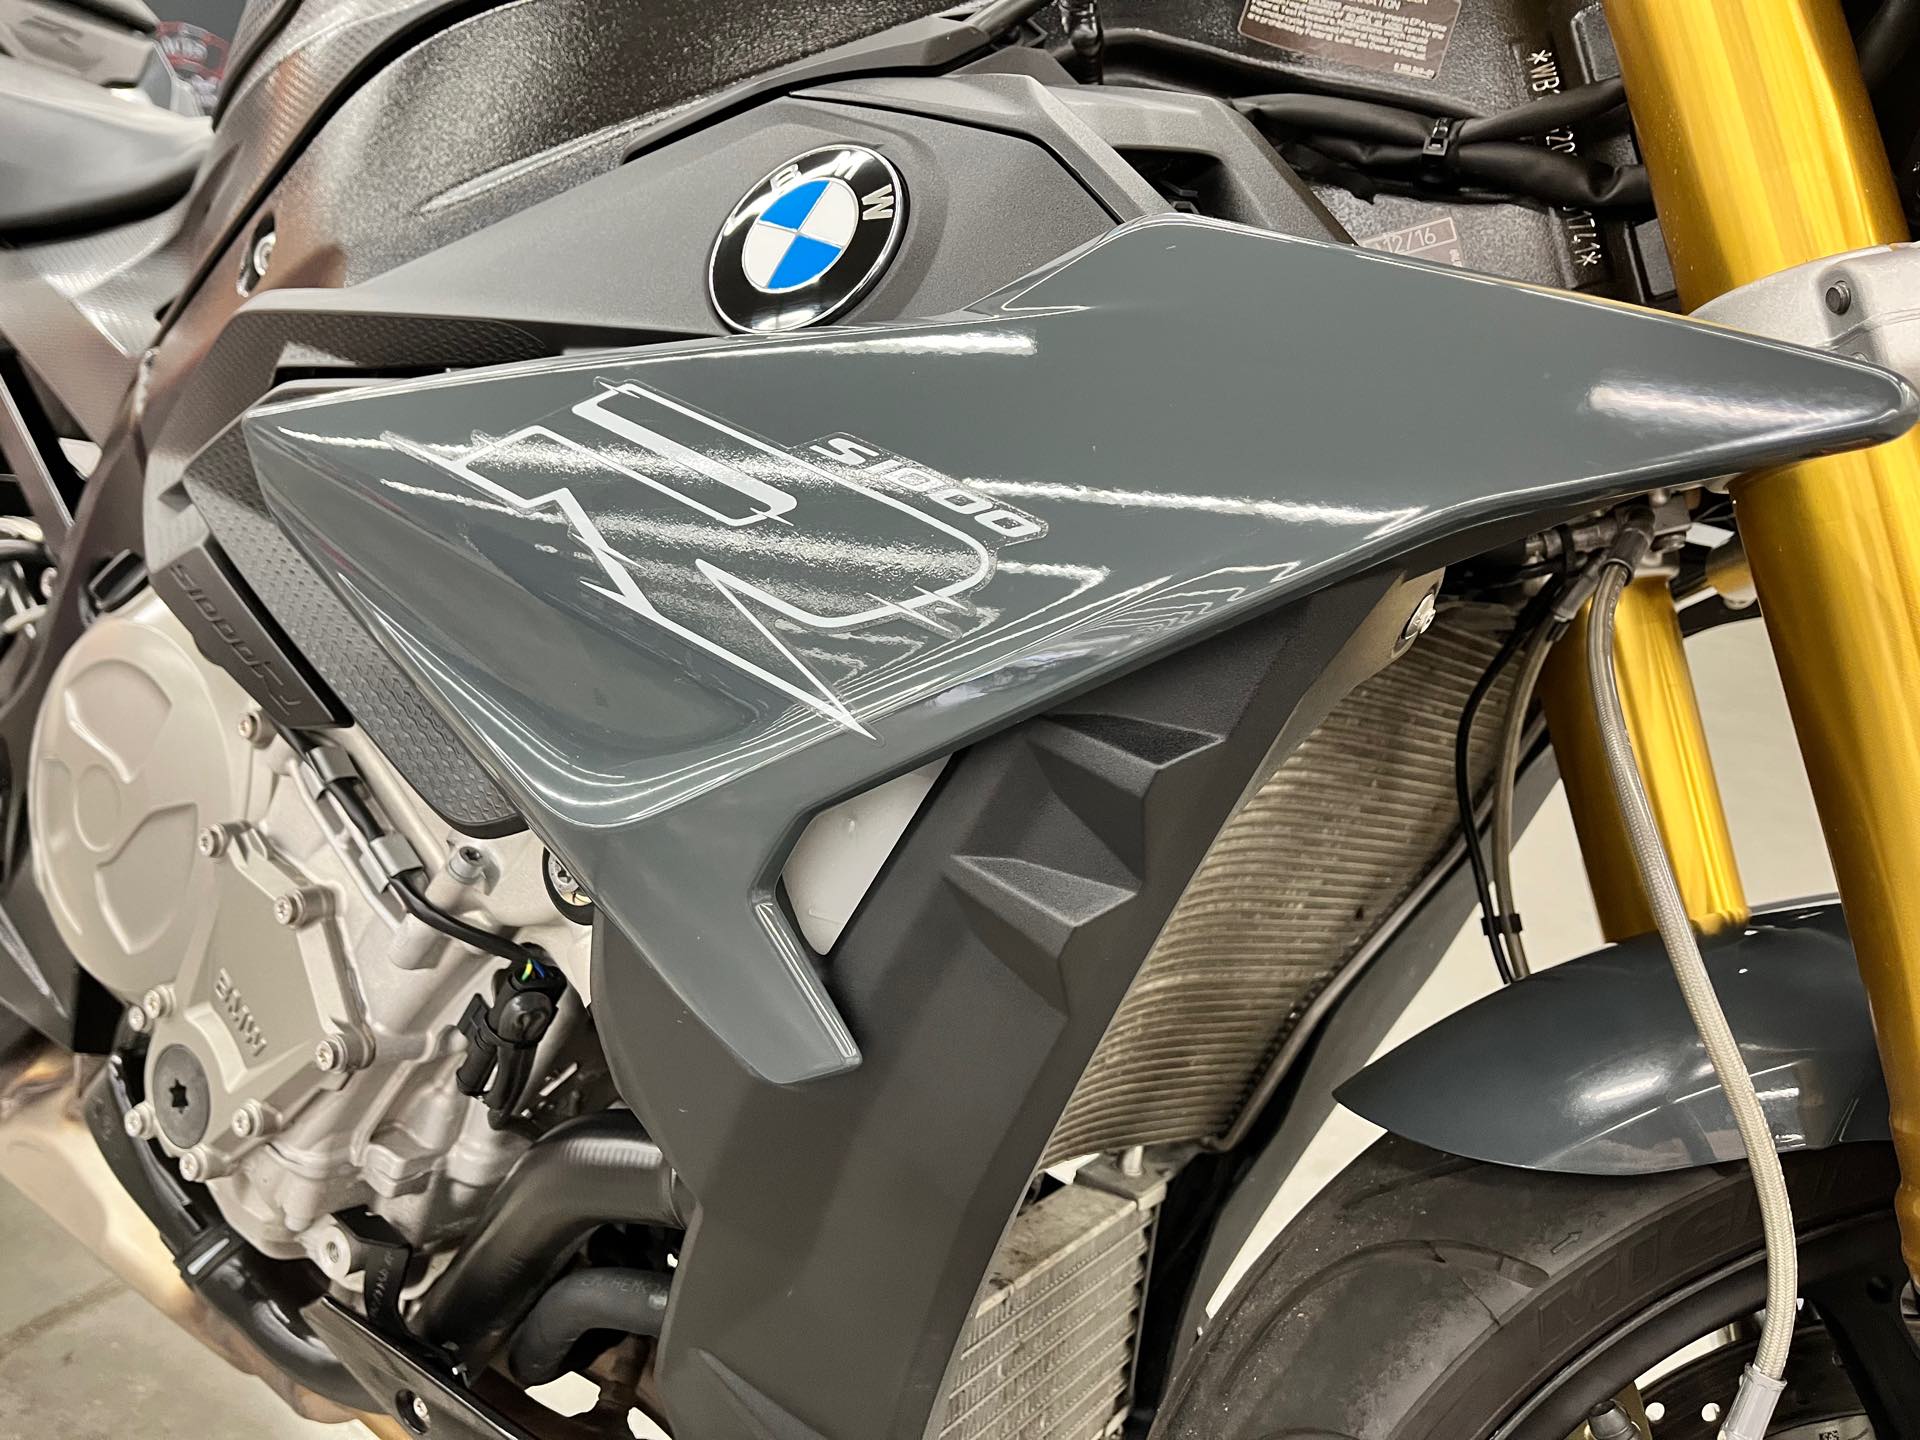 2017 BMW S 1000 R at Aces Motorcycles - Denver